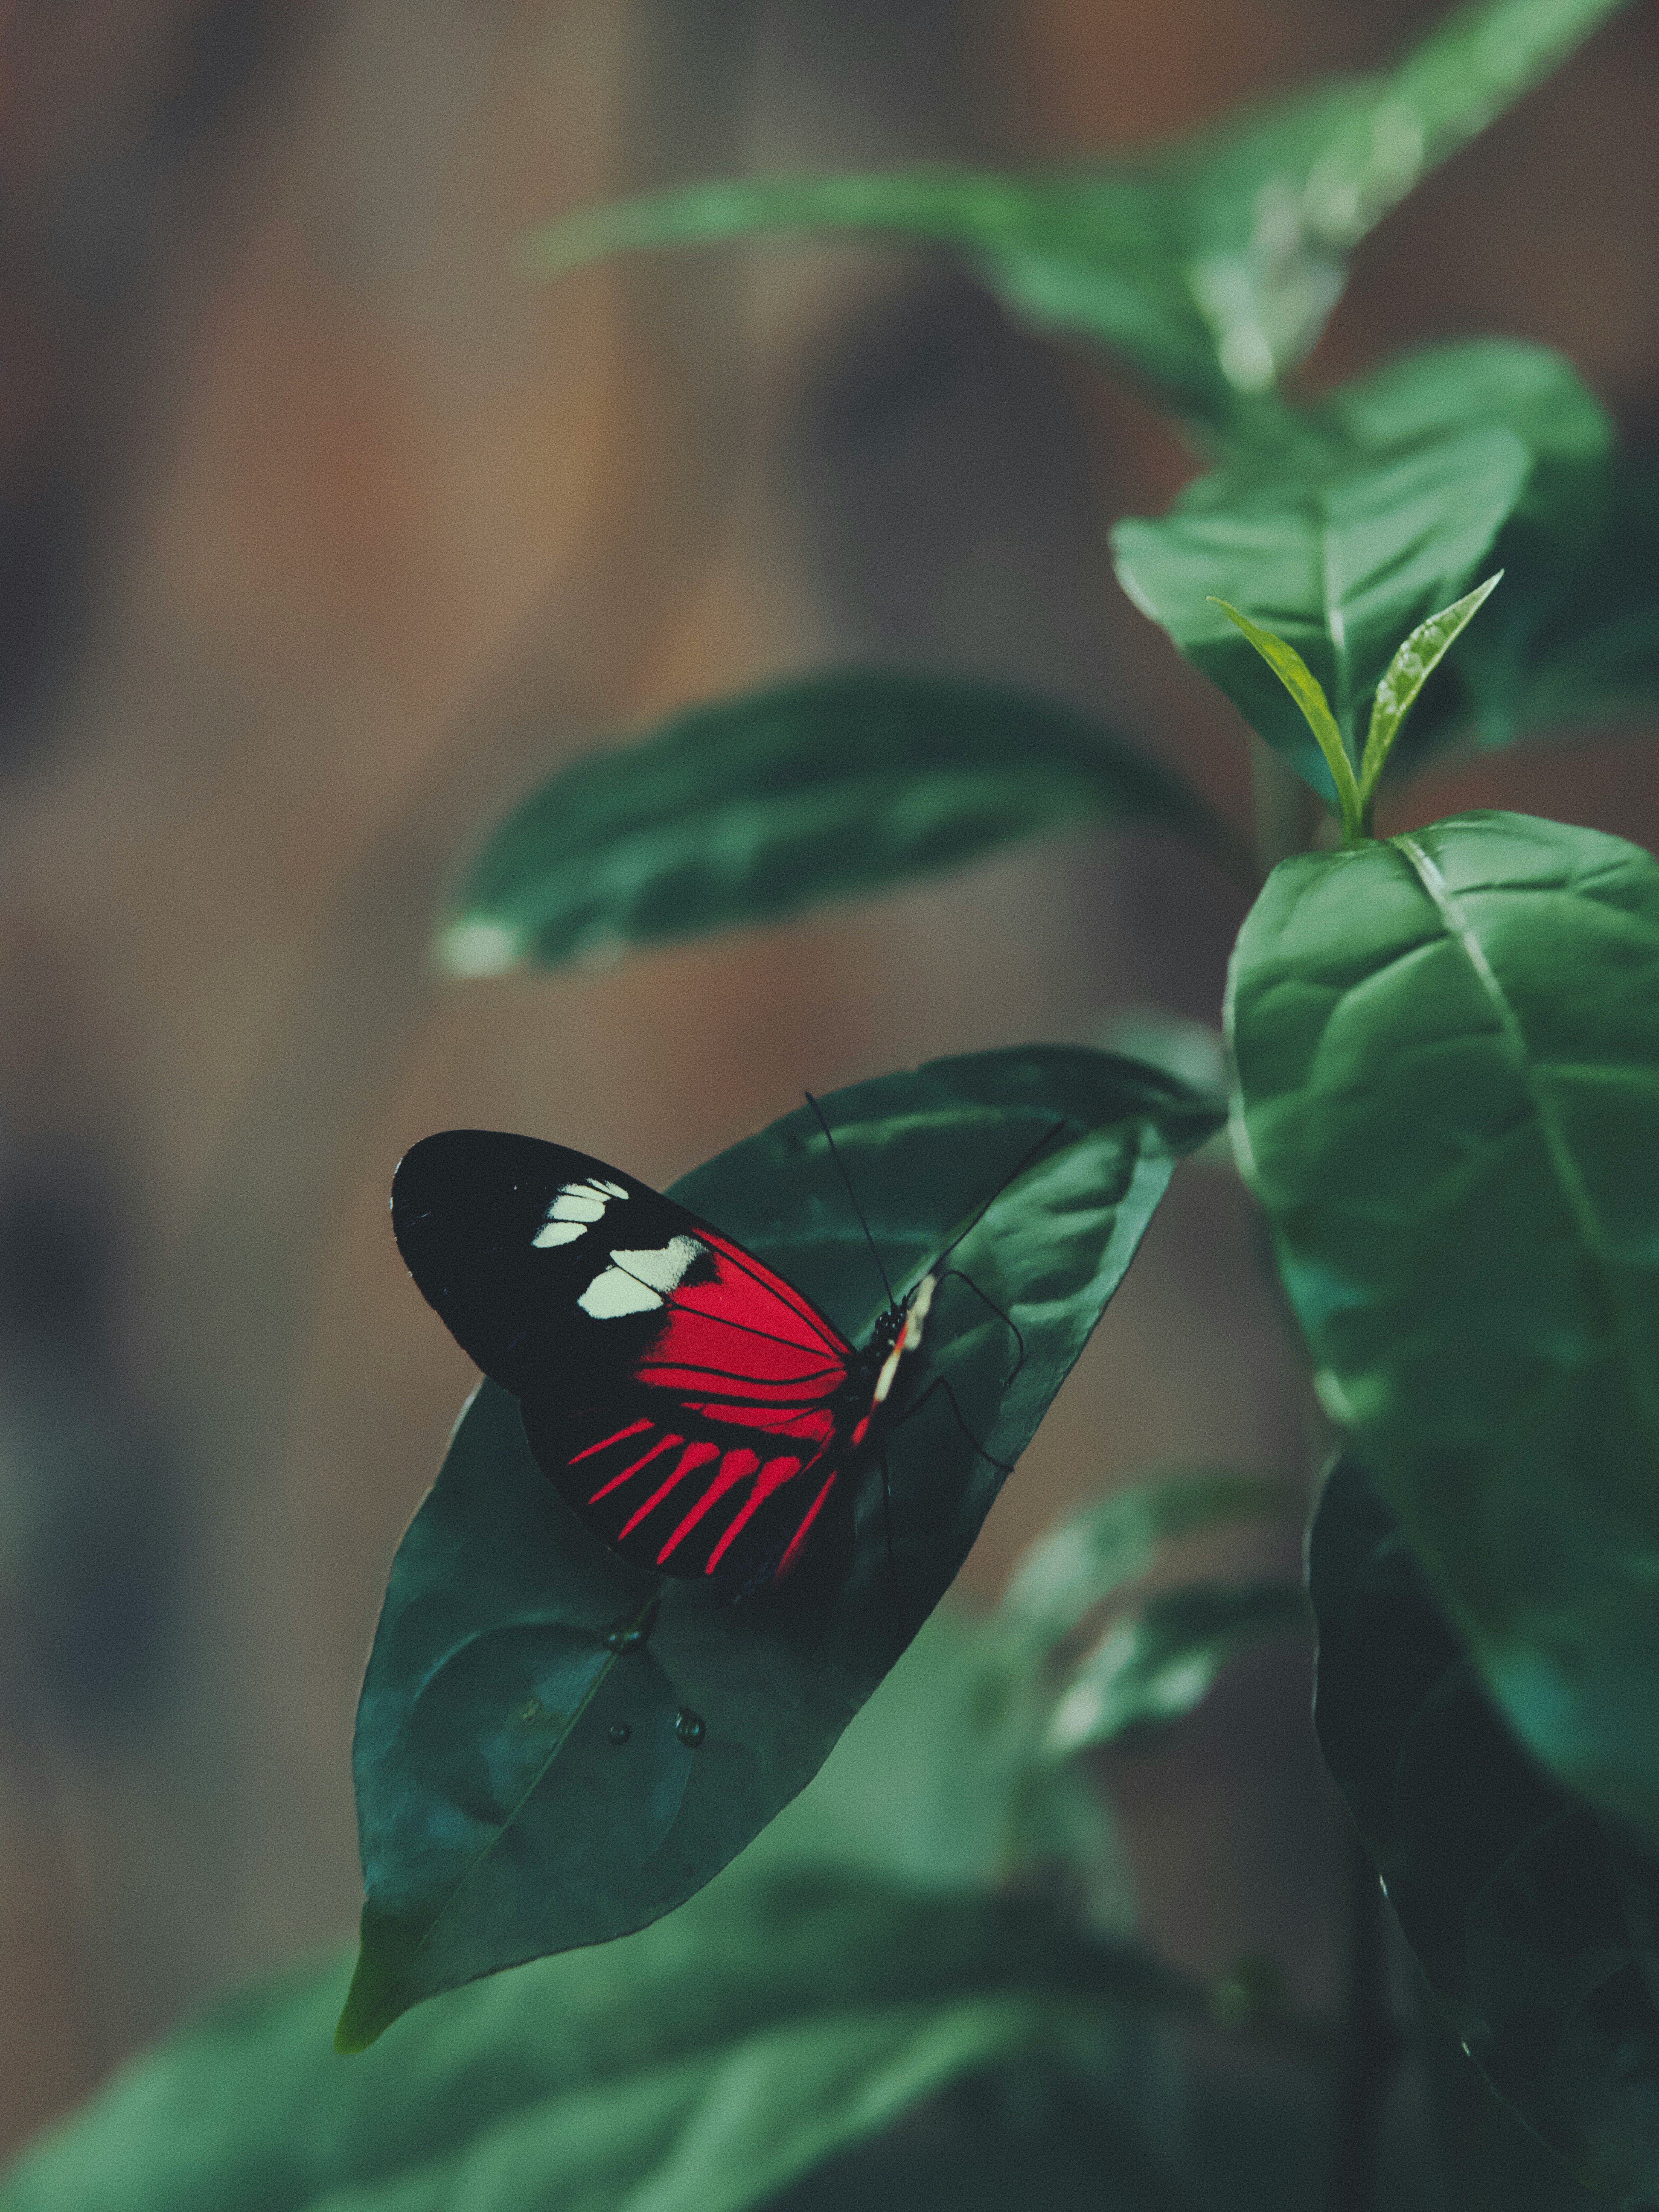 black and red butterfly perched on green leaf